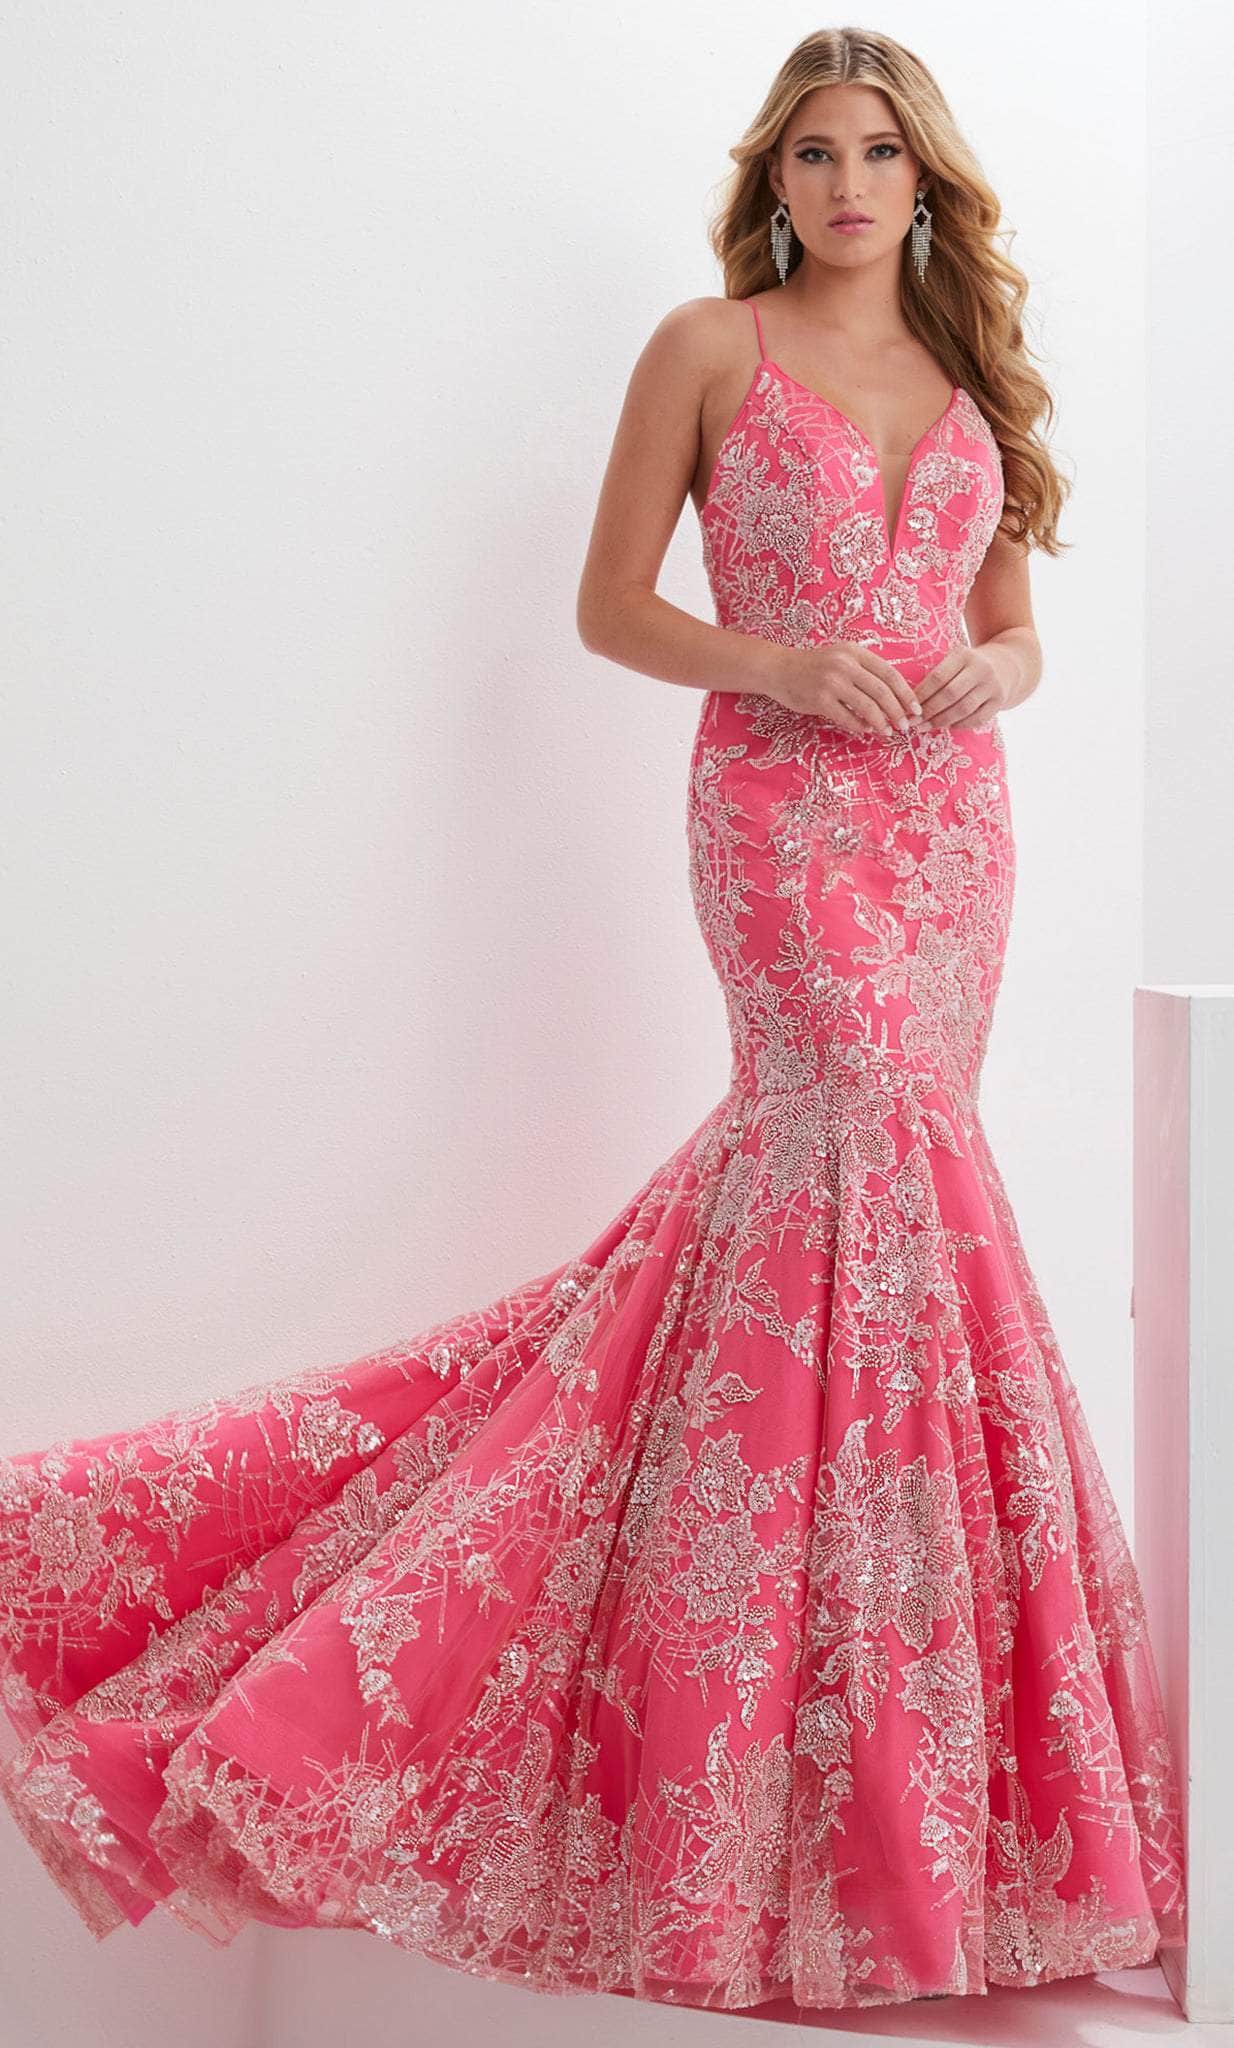 Panoply 14138 - Sweetheart Sequin Lace Evening Gown
